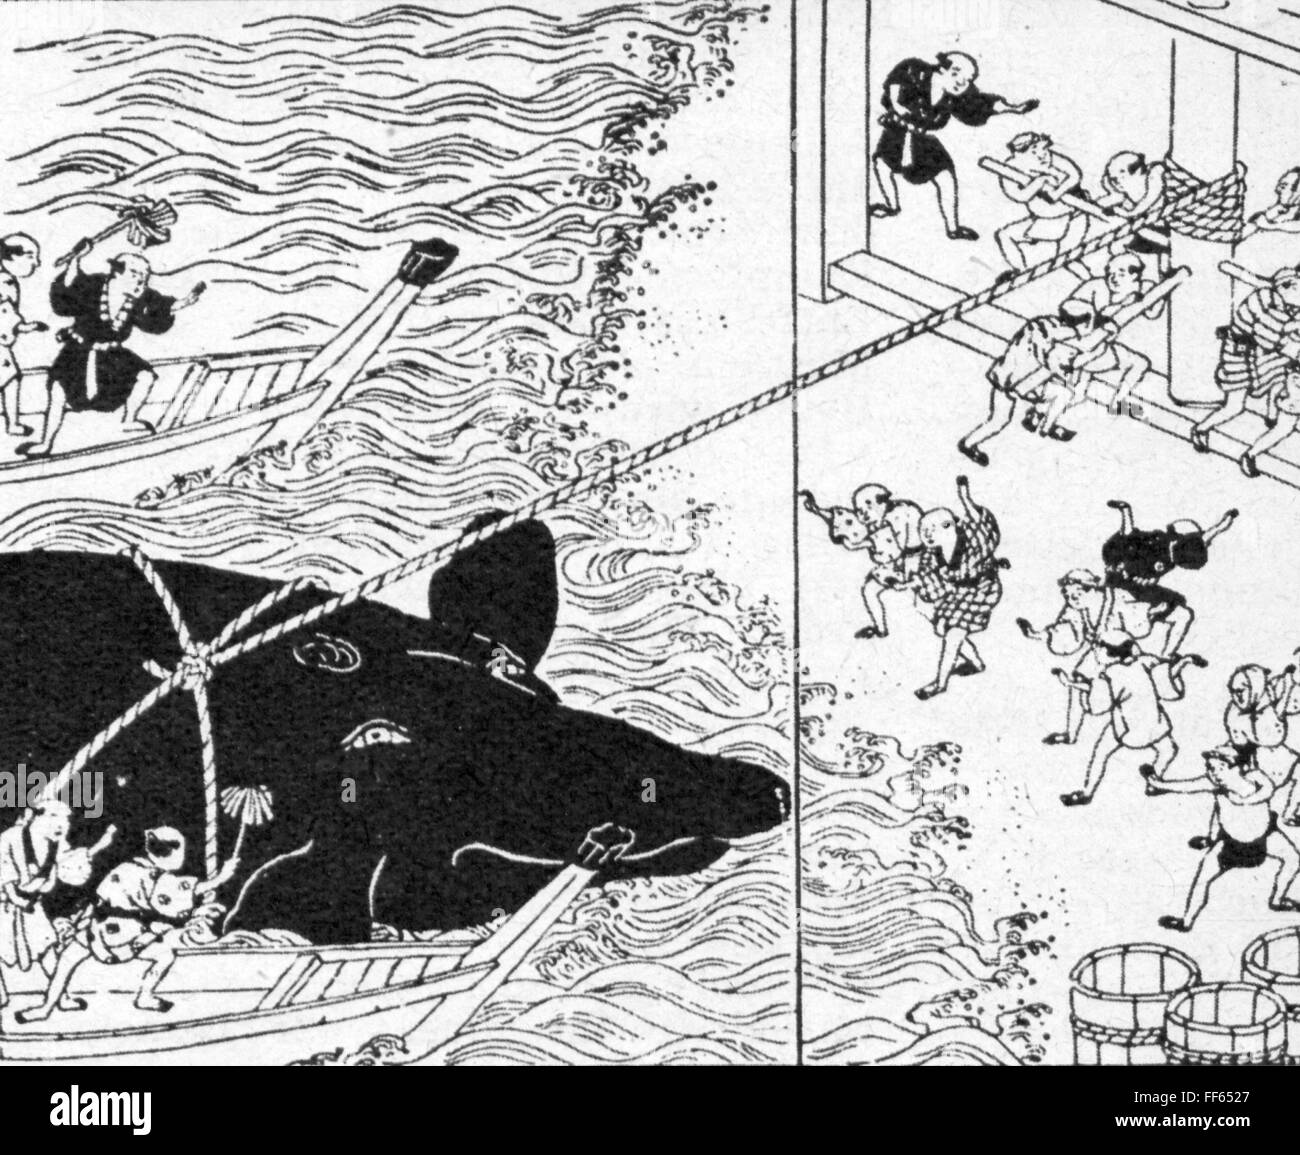 fishery, whaling, a whale is pulled on land under singing, Japanese woodcut, 18th / 19th century, technics, rope, ropes, rope winch, rope winches, whaler, whalers, labour, labor, working, work, Japan, Japanese, people, men, man, male, fishery, fisheries, fishing, whale, whales, singing, singings, pull, pulling, woodcut, woodcuts, historic, historical, Additional-Rights-Clearences-Not Available Stock Photo